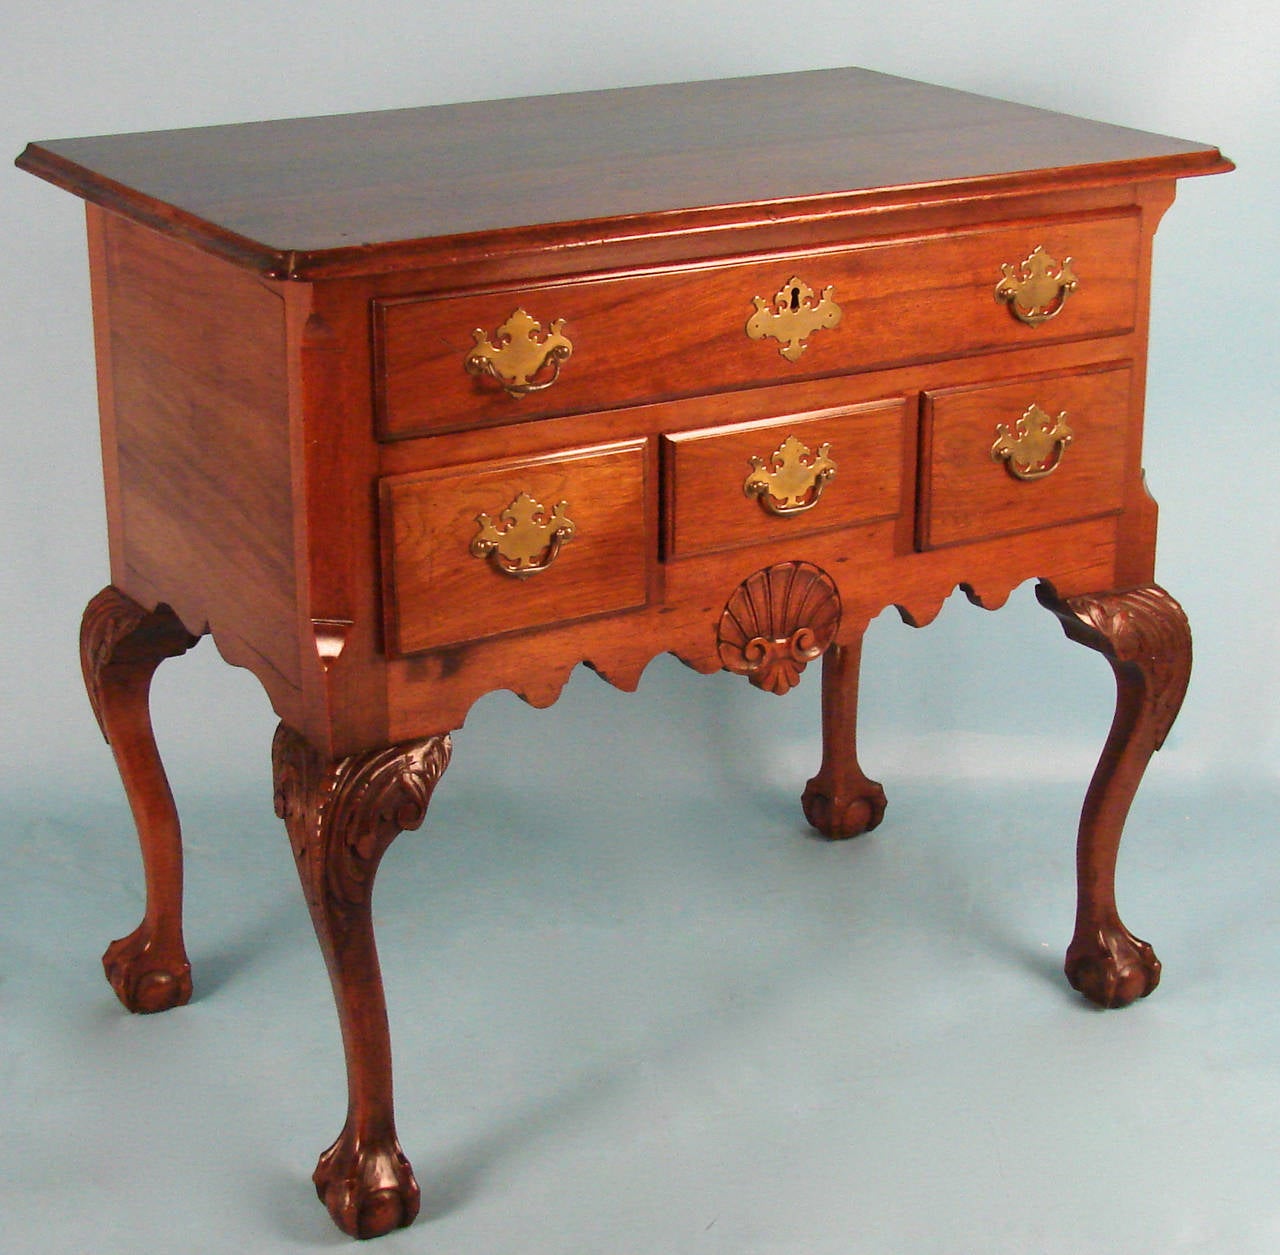 An American Chippendale style lowboy or dressing table, the overhanging top with notched corners above one long and three short drawers centered by a carved shell on a shaped apron, all supported on cabriole legs with carved knees terminating in